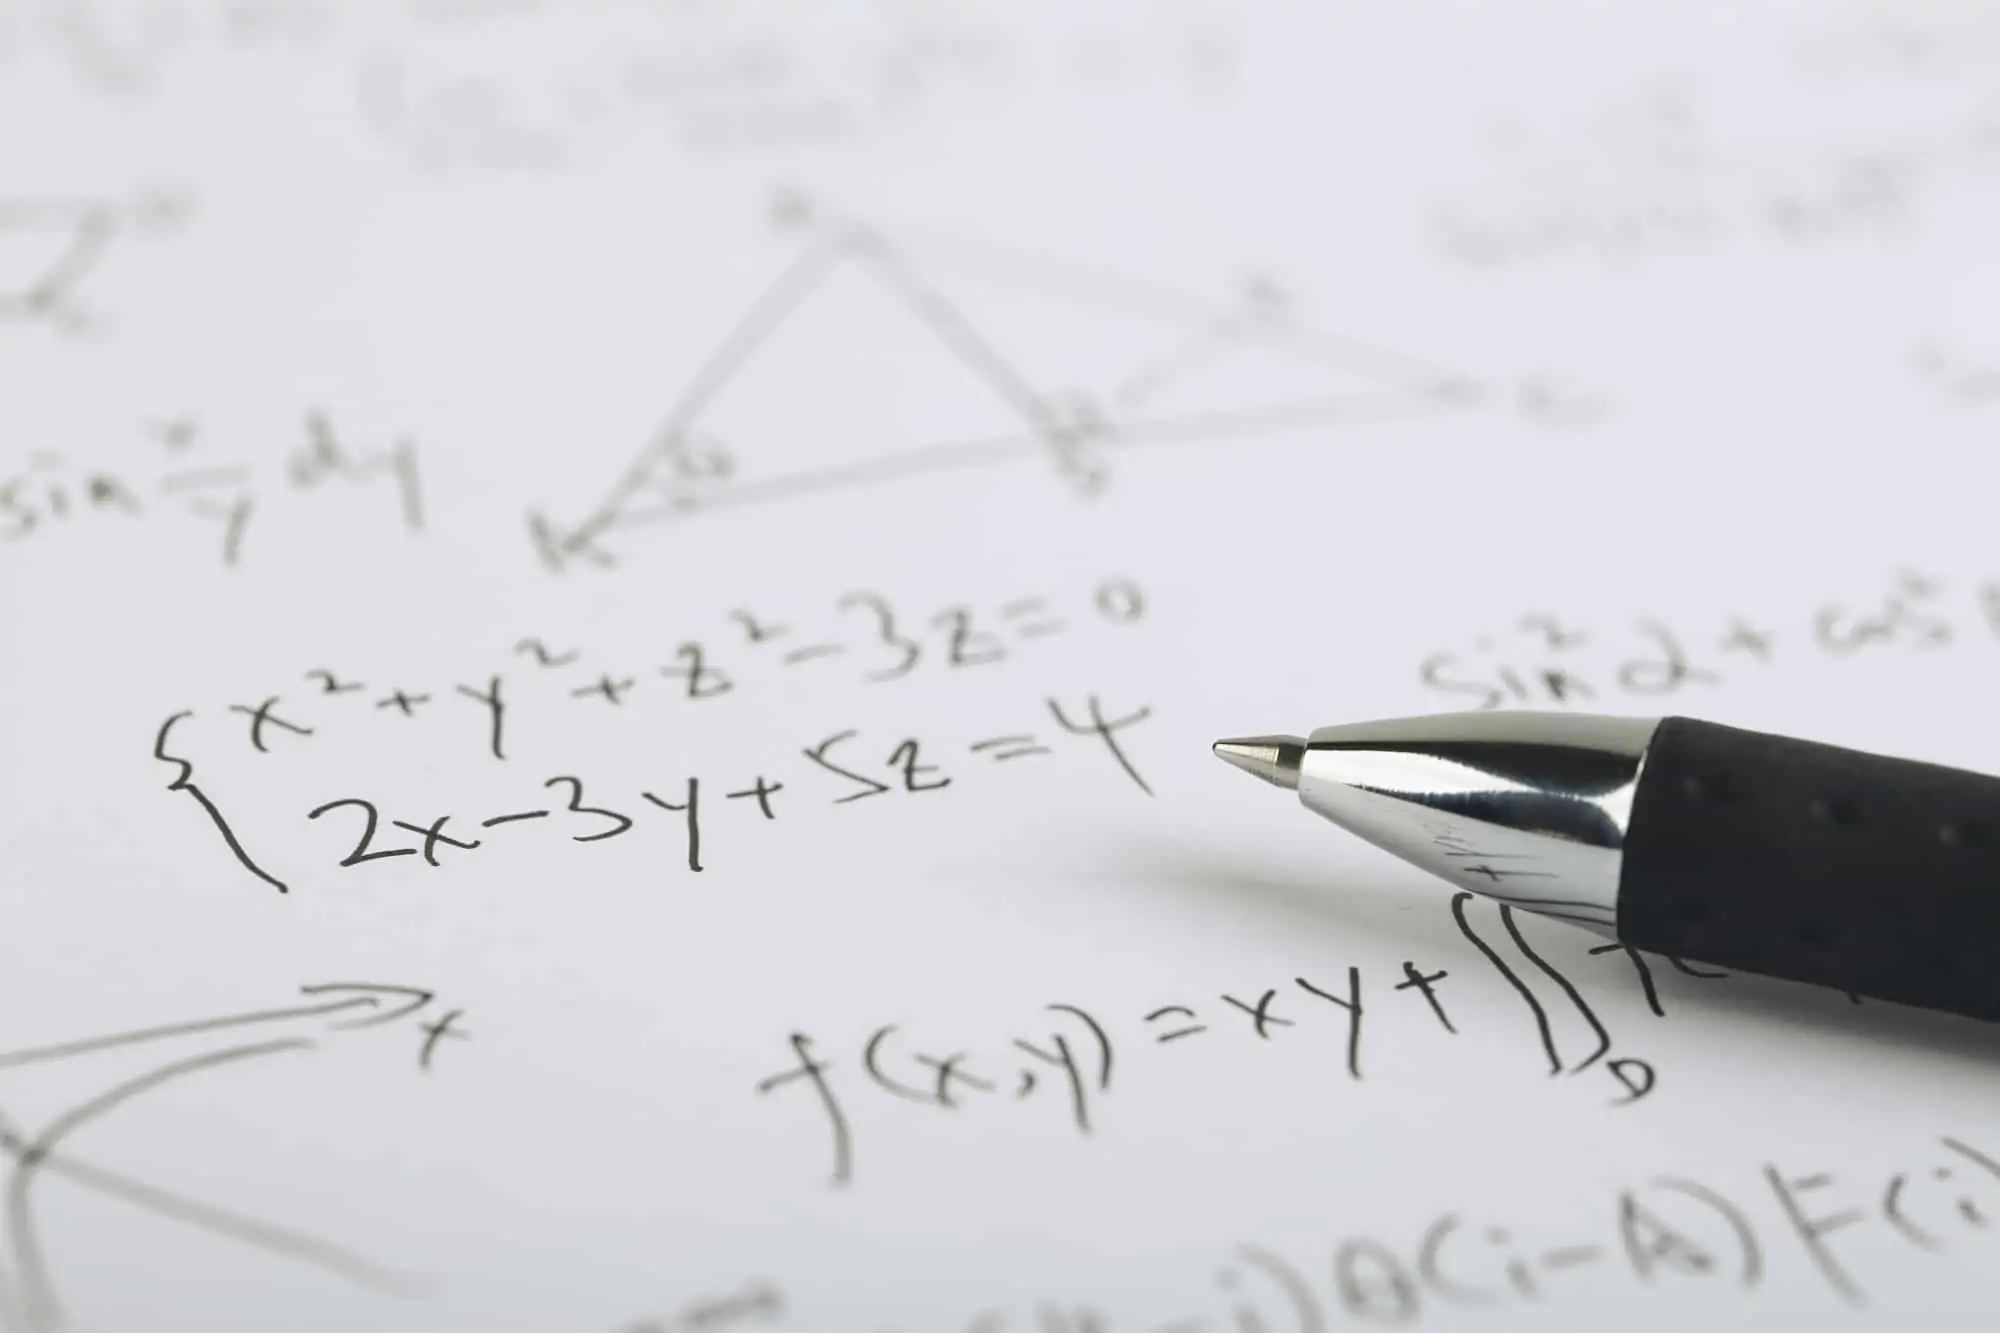 Calculating net income using complex math formulas on paper with a black ceramic ball pen.